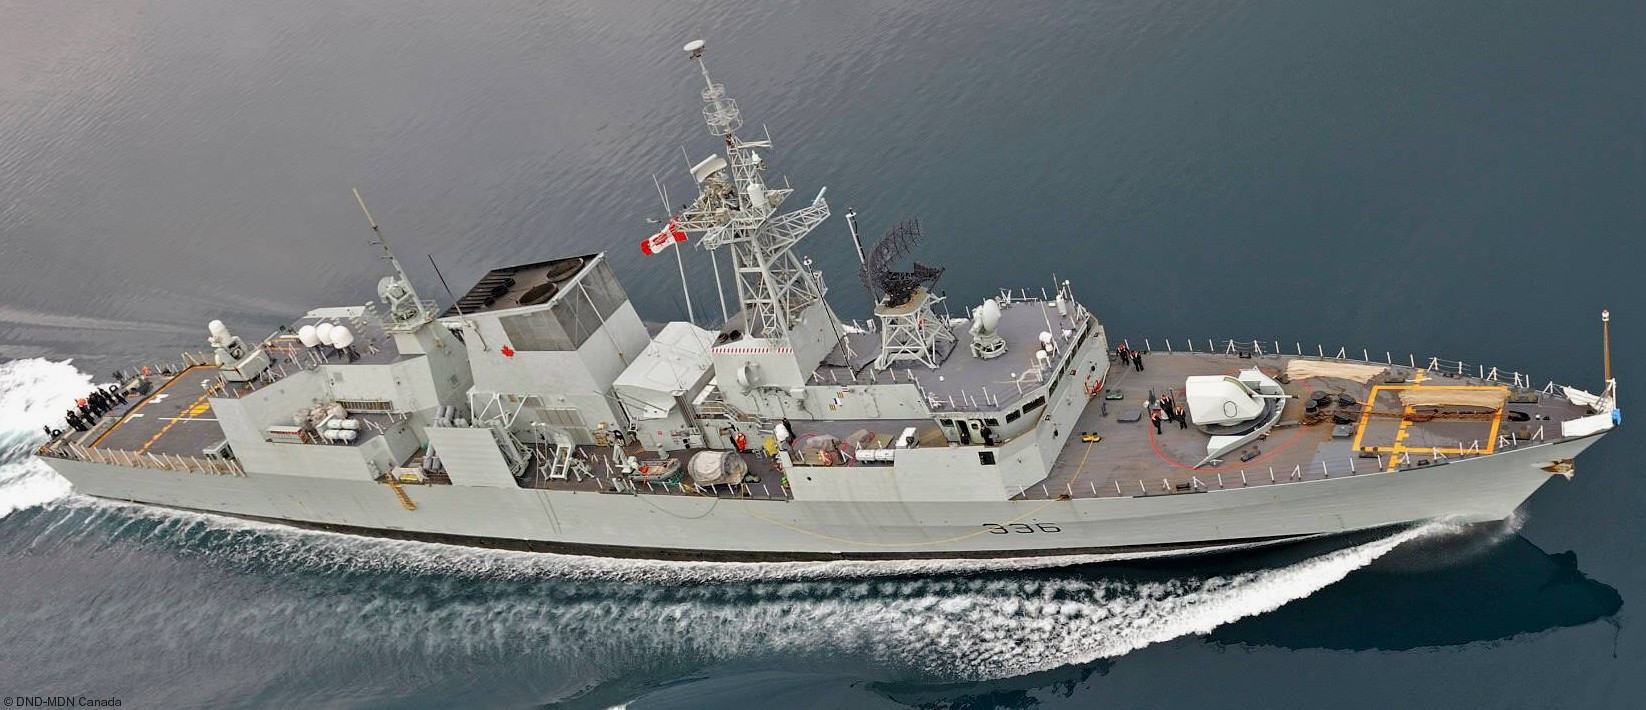 ffh-336 hmcs montreal halifax class helicopter patrol frigate ncsm royal canadian navy 27